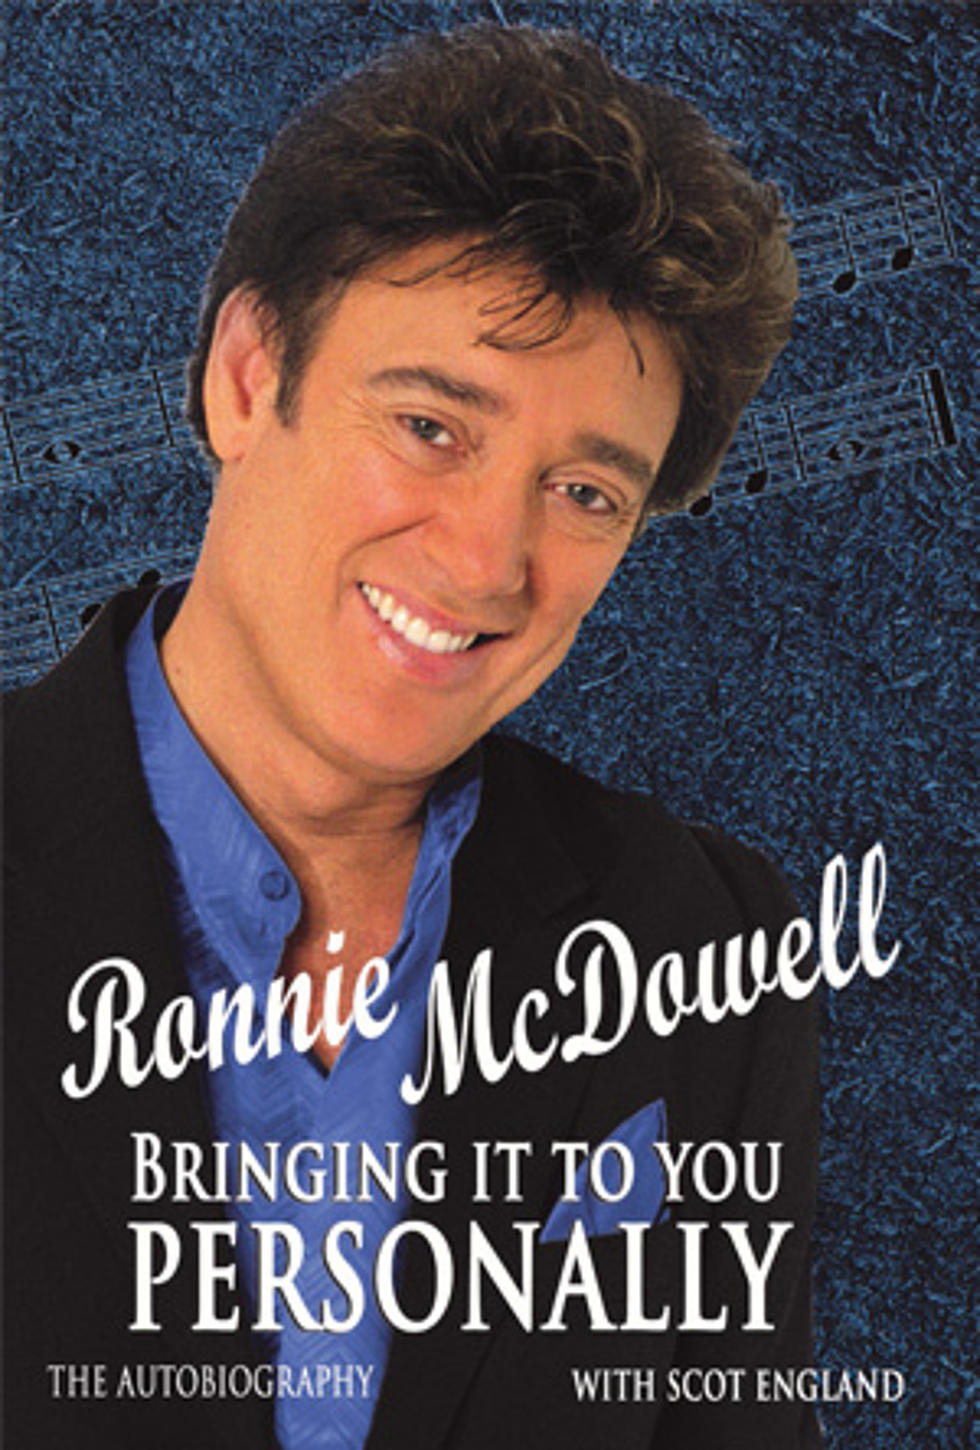 Ronnie McDowell Releases Autobiography